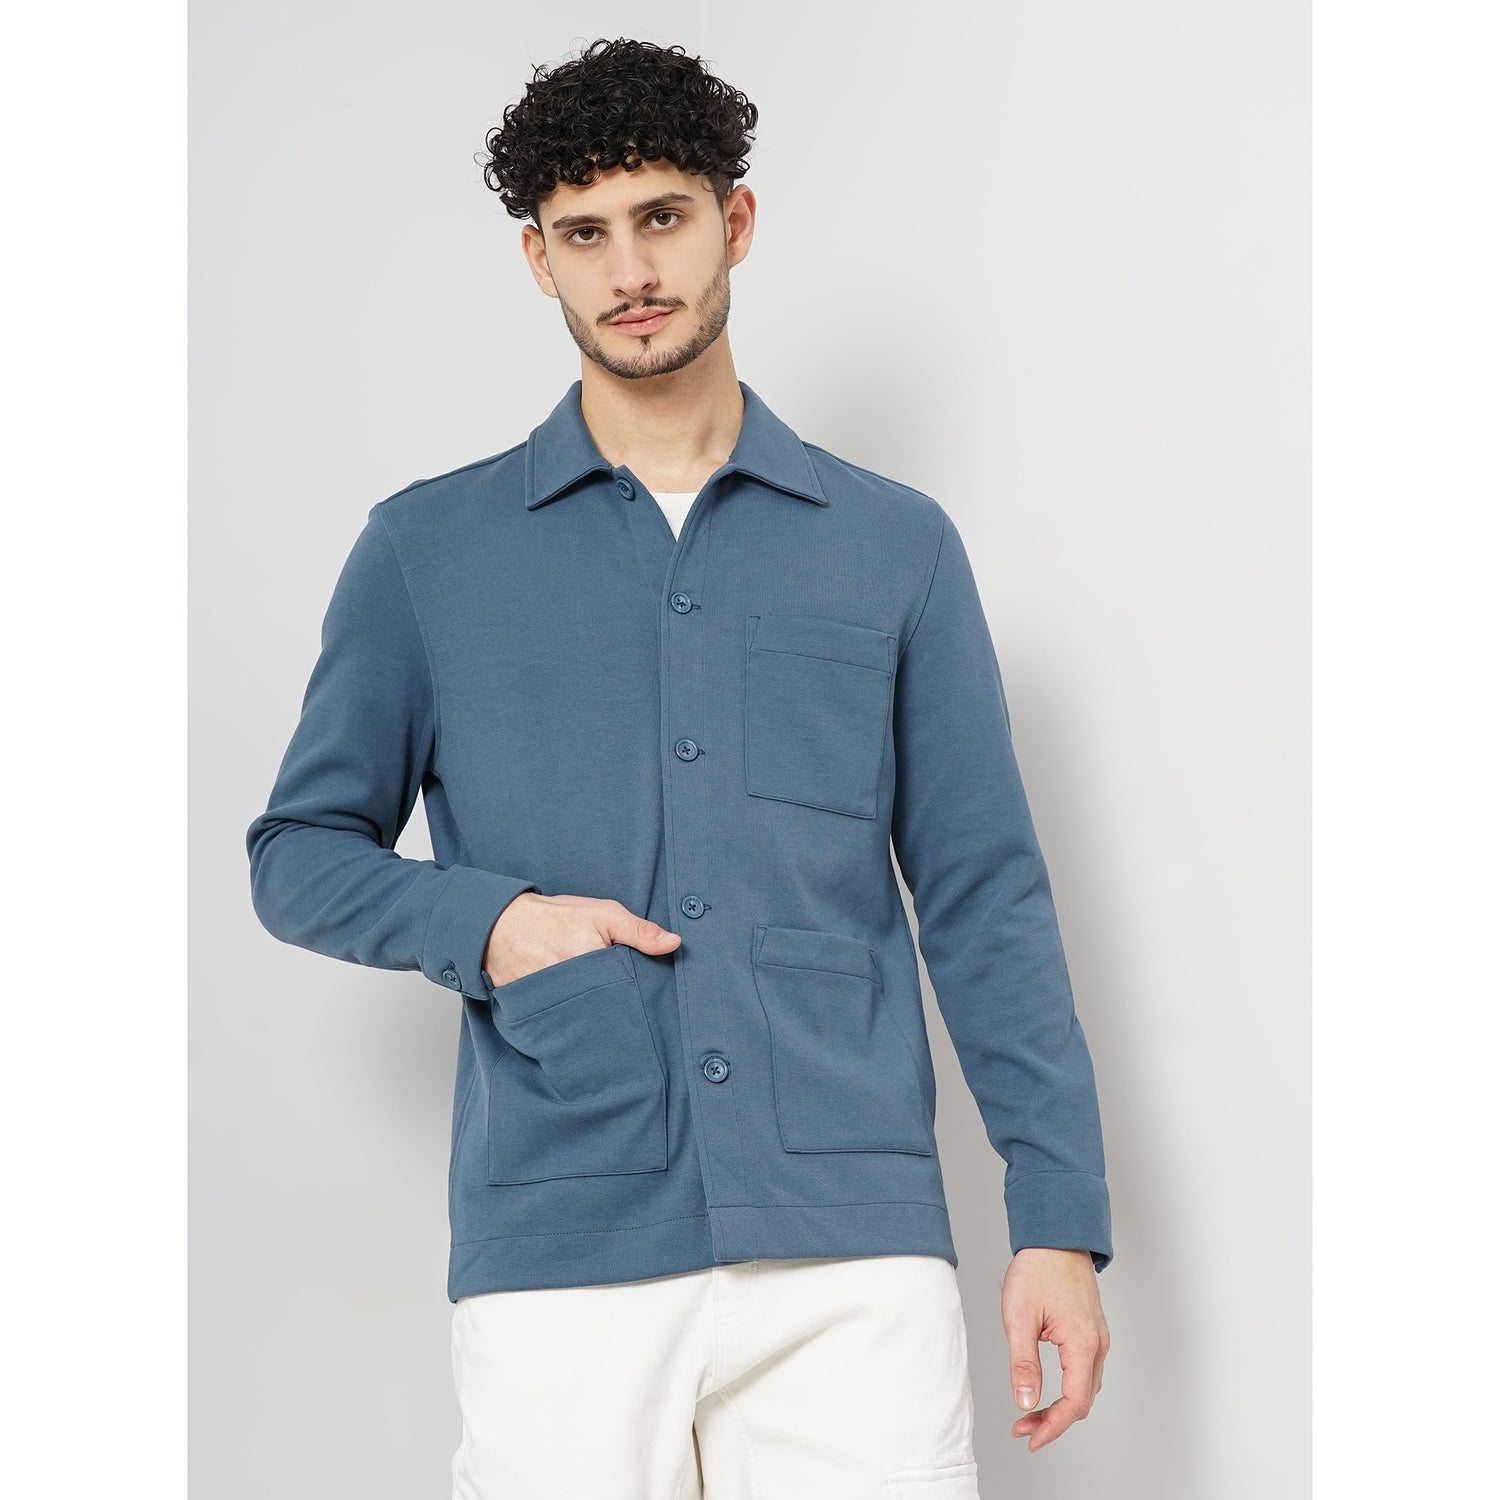 Men Blue Solid Oversized Polycotton Casual Shirt (GALOCK)